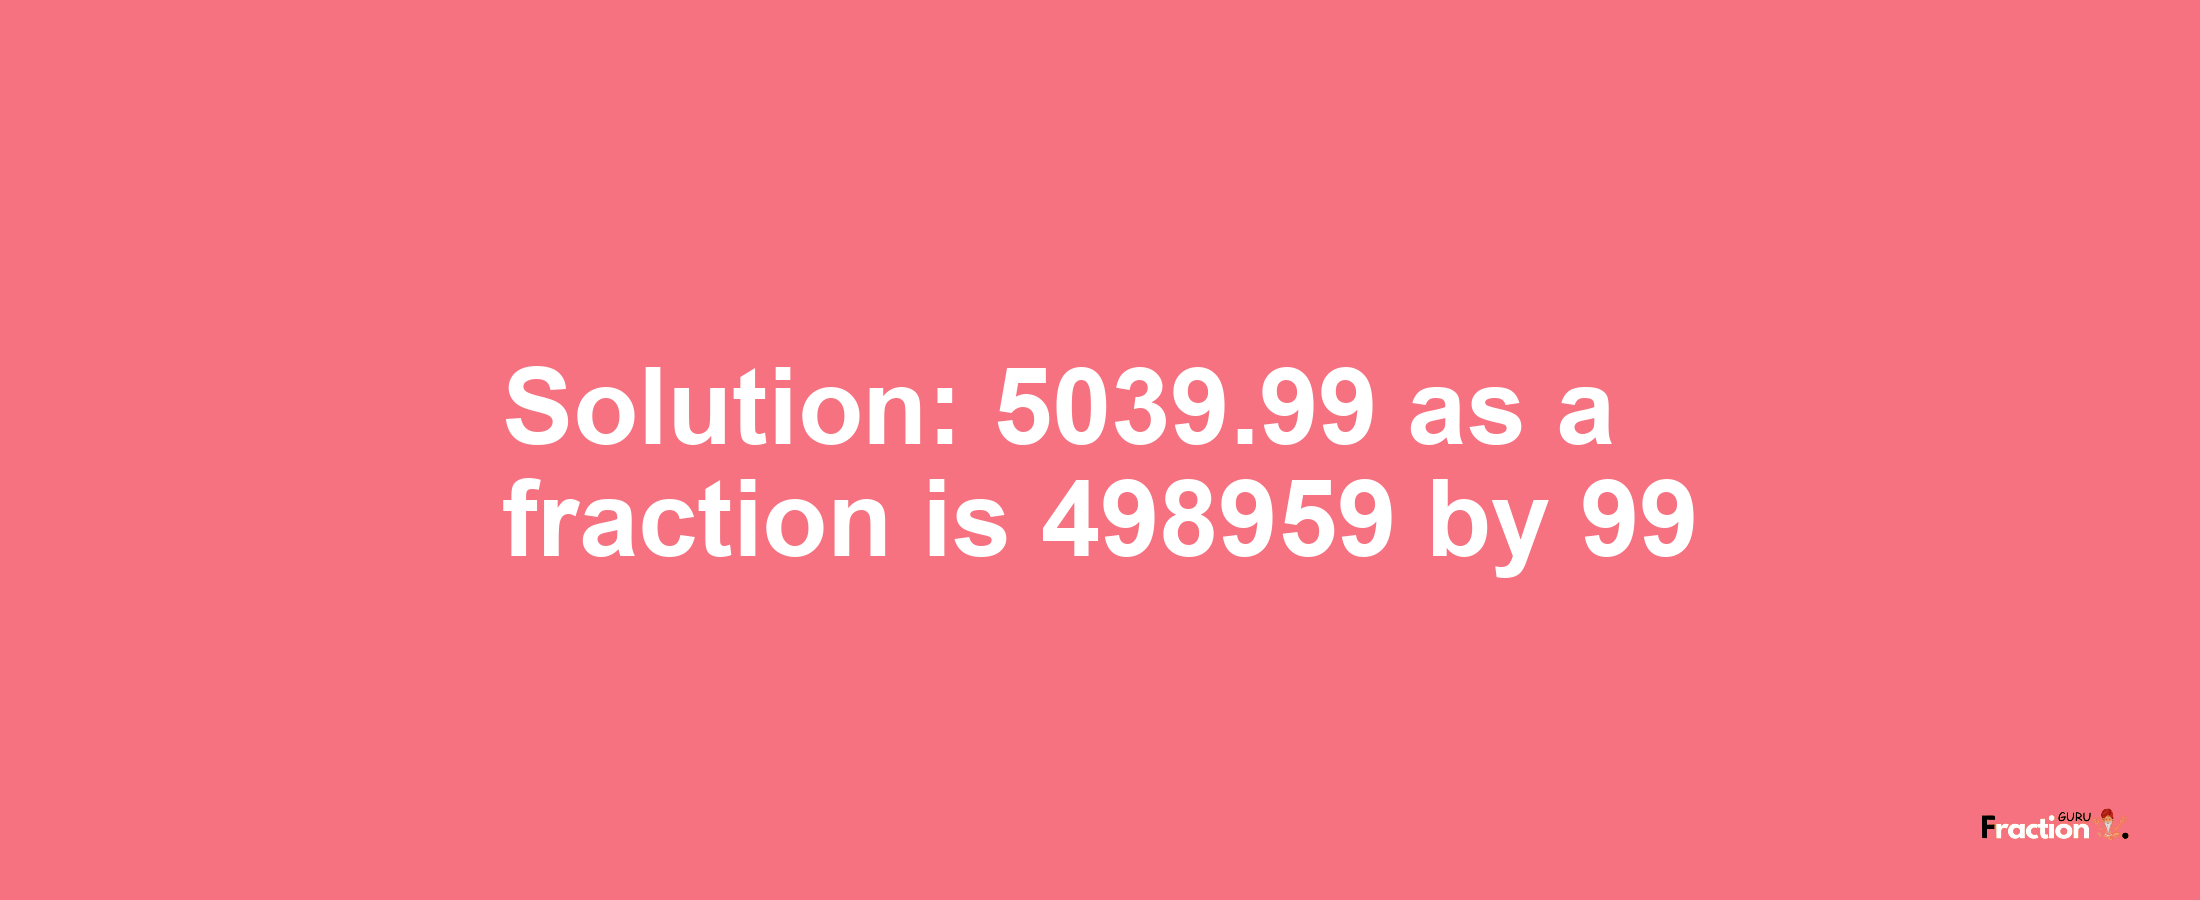 Solution:5039.99 as a fraction is 498959/99